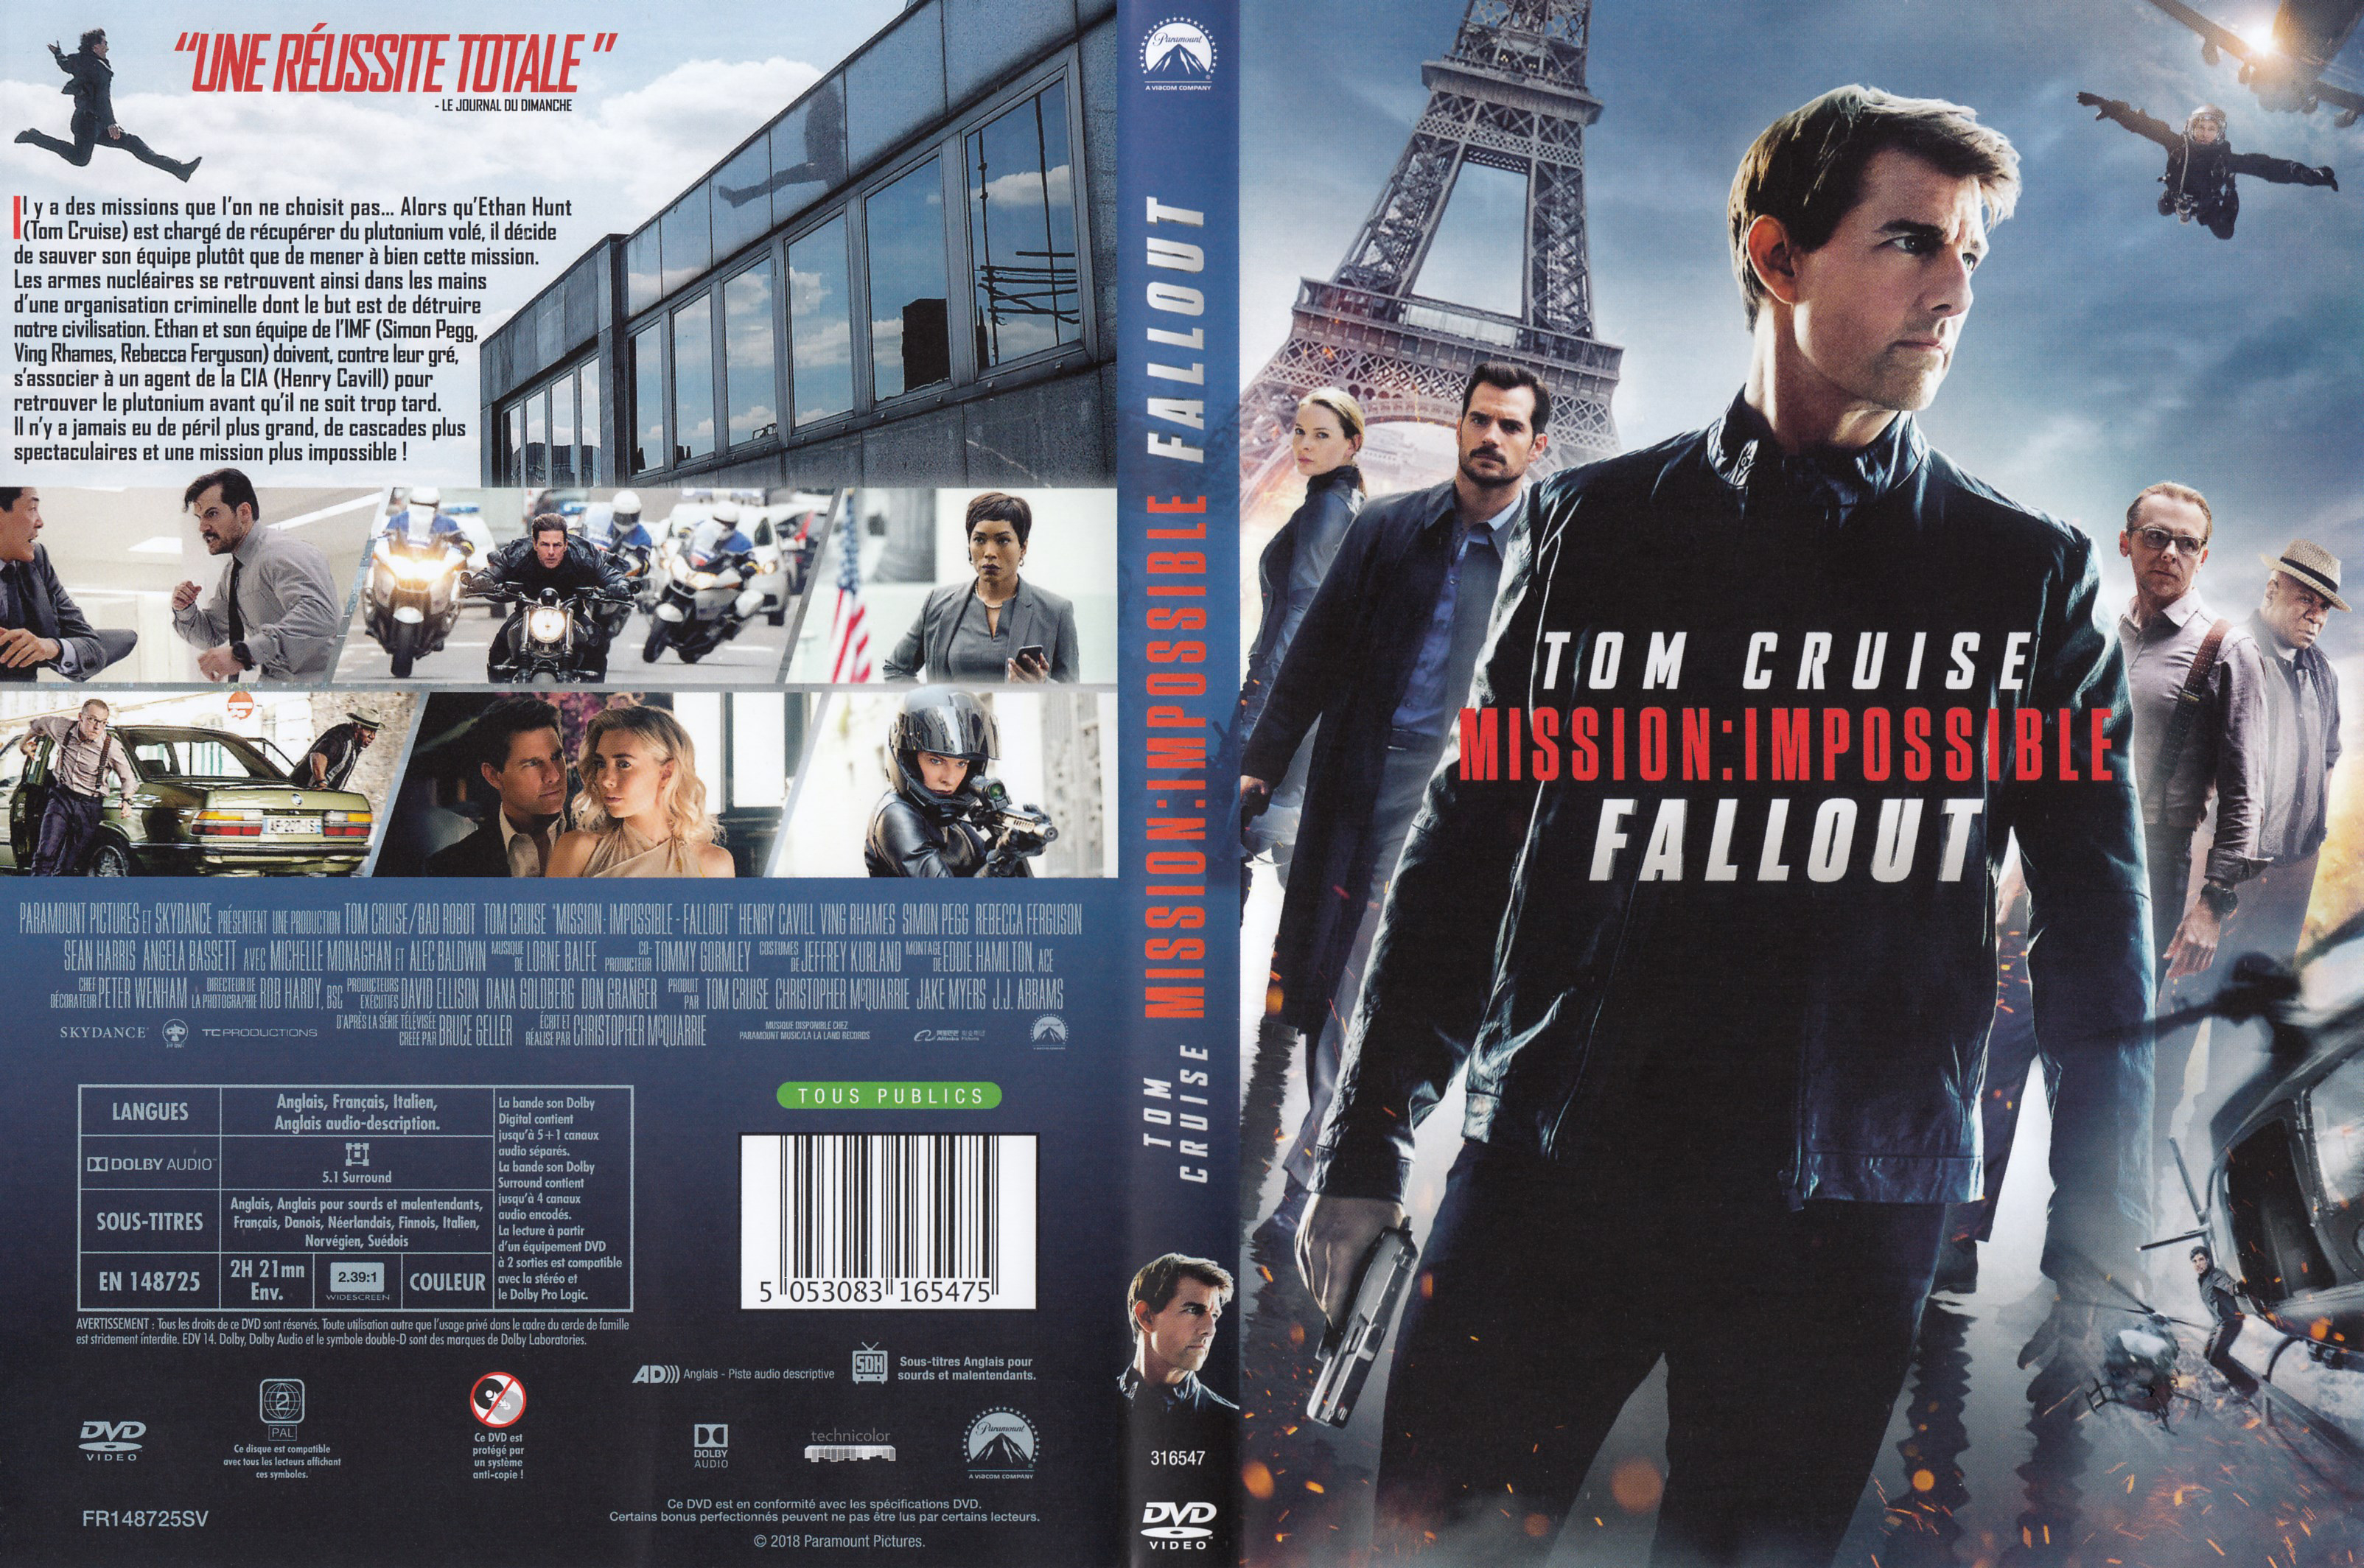 Jaquette DVD Mission impossible fallout